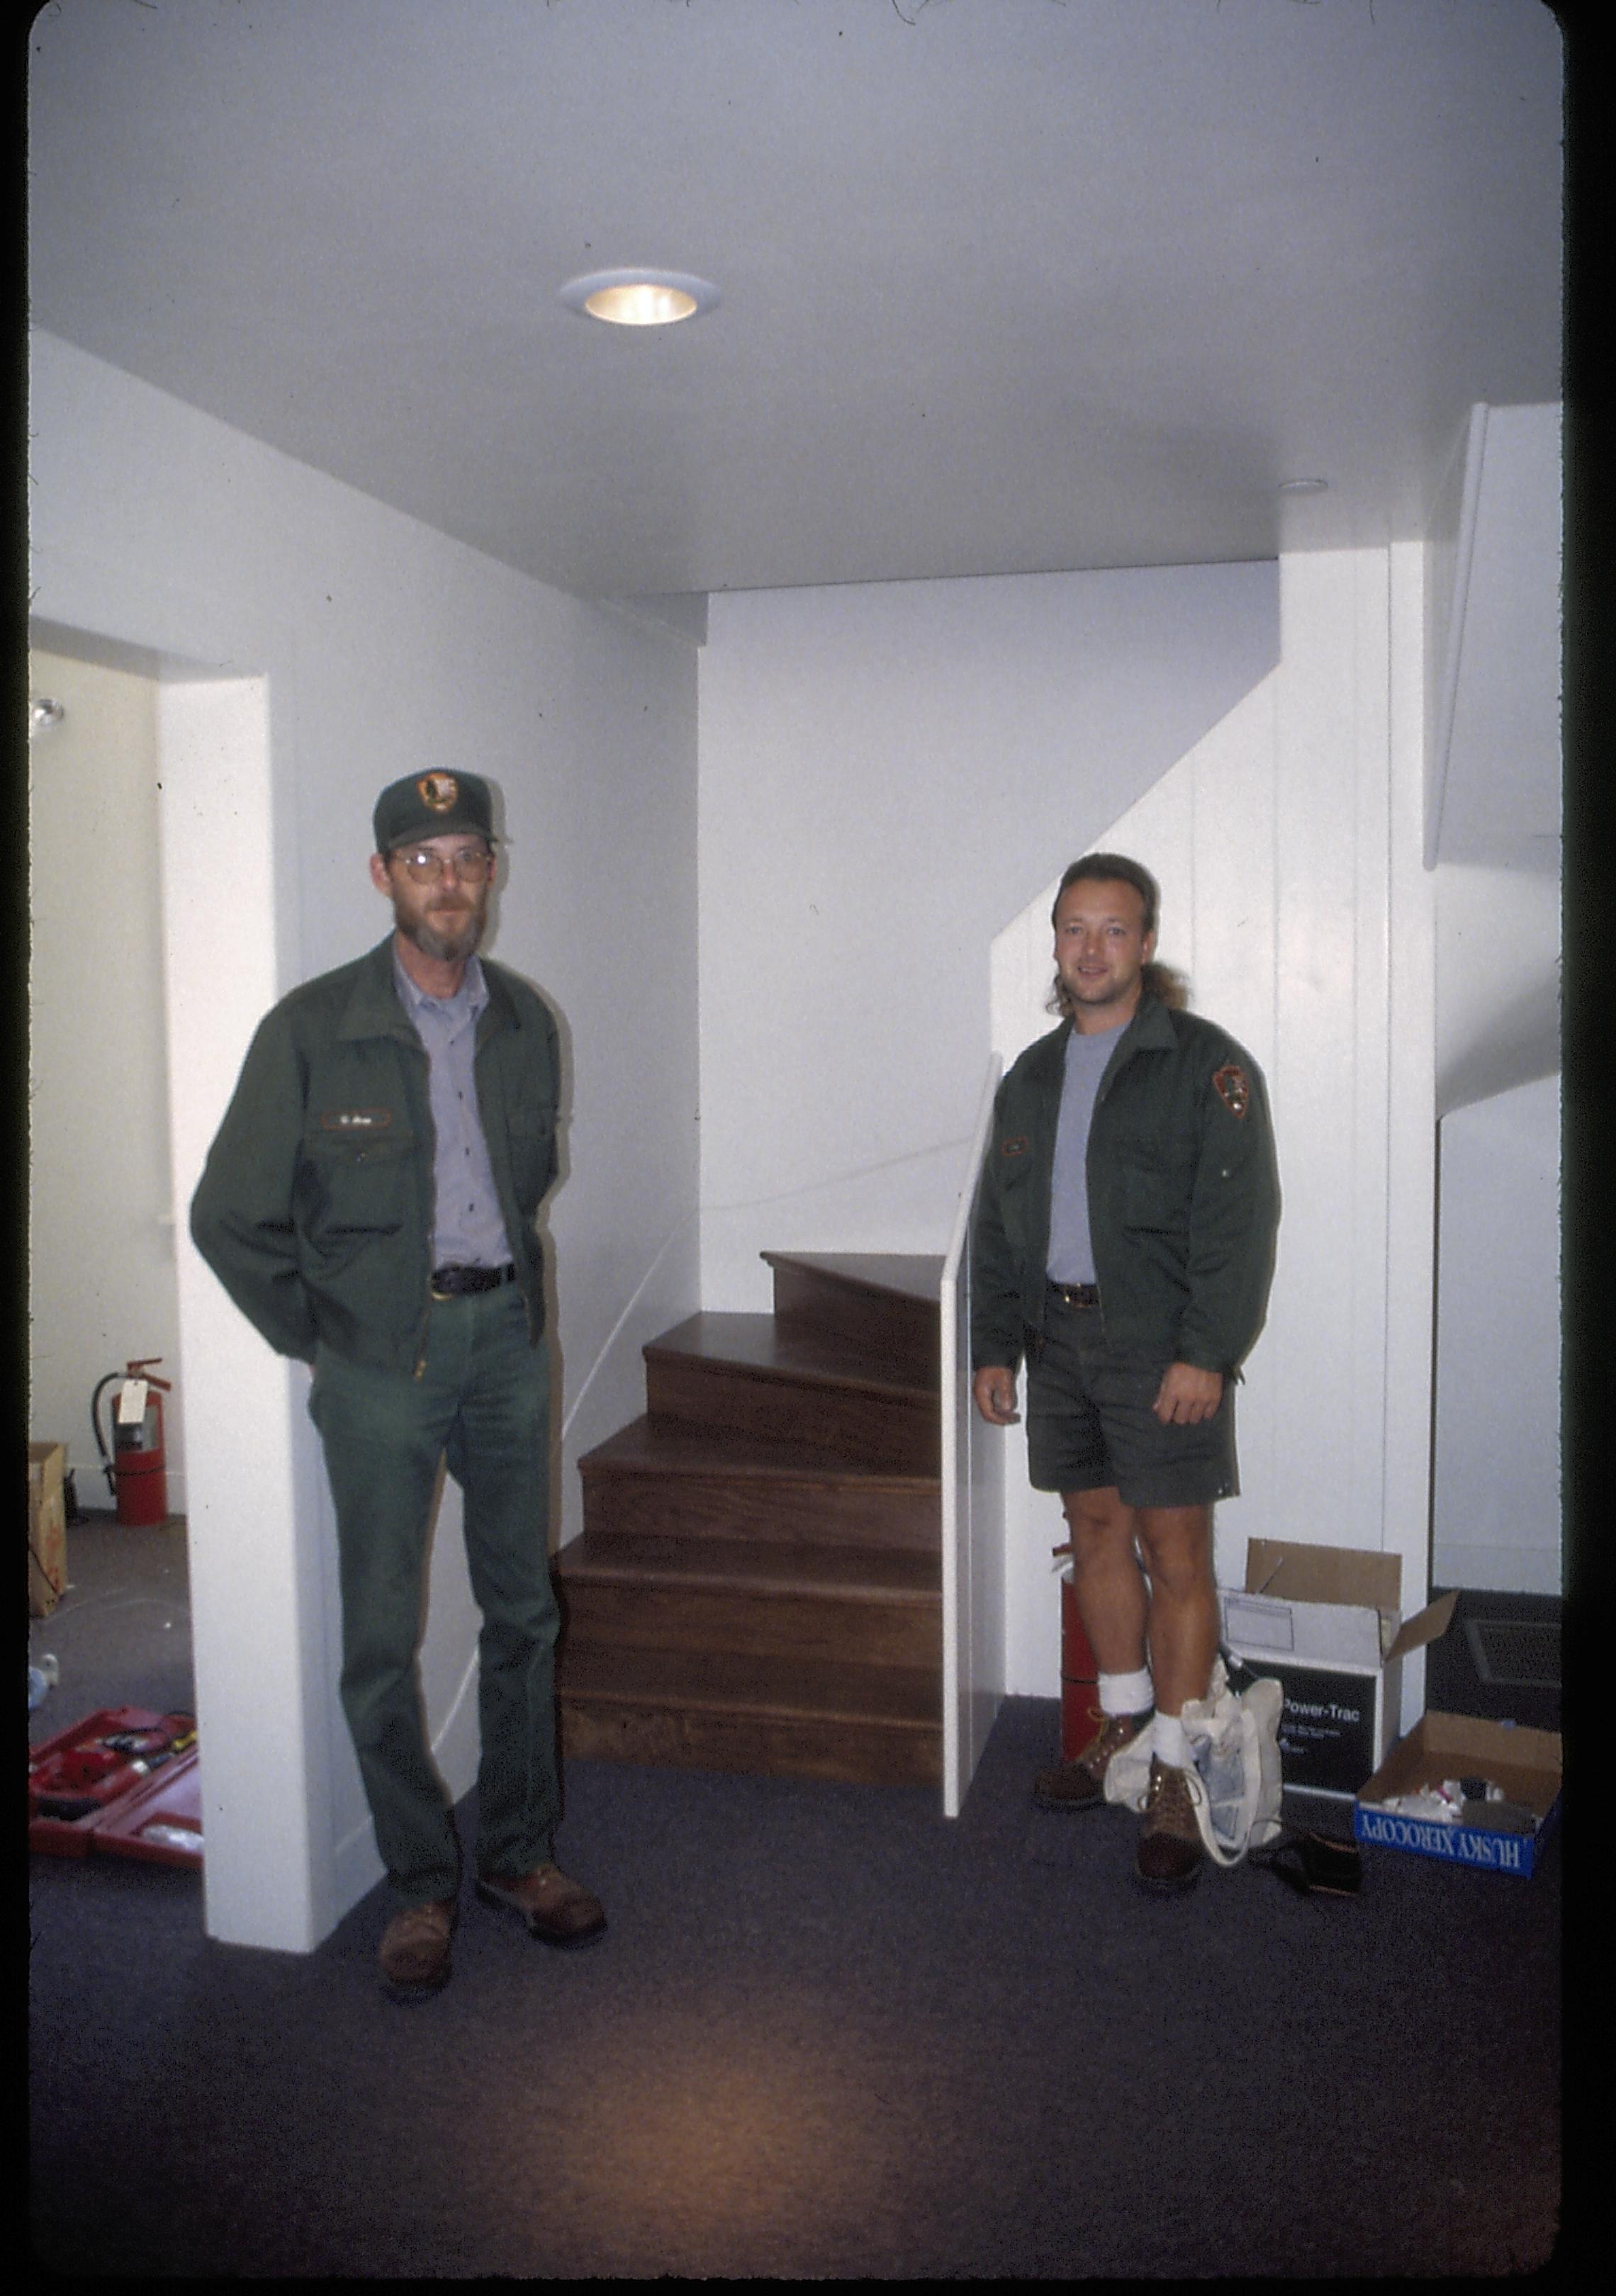 Stair fabrication LIHO NHS- Arnold House Exhibit, #18 Slides, exp 21 Arnold House, exhibit